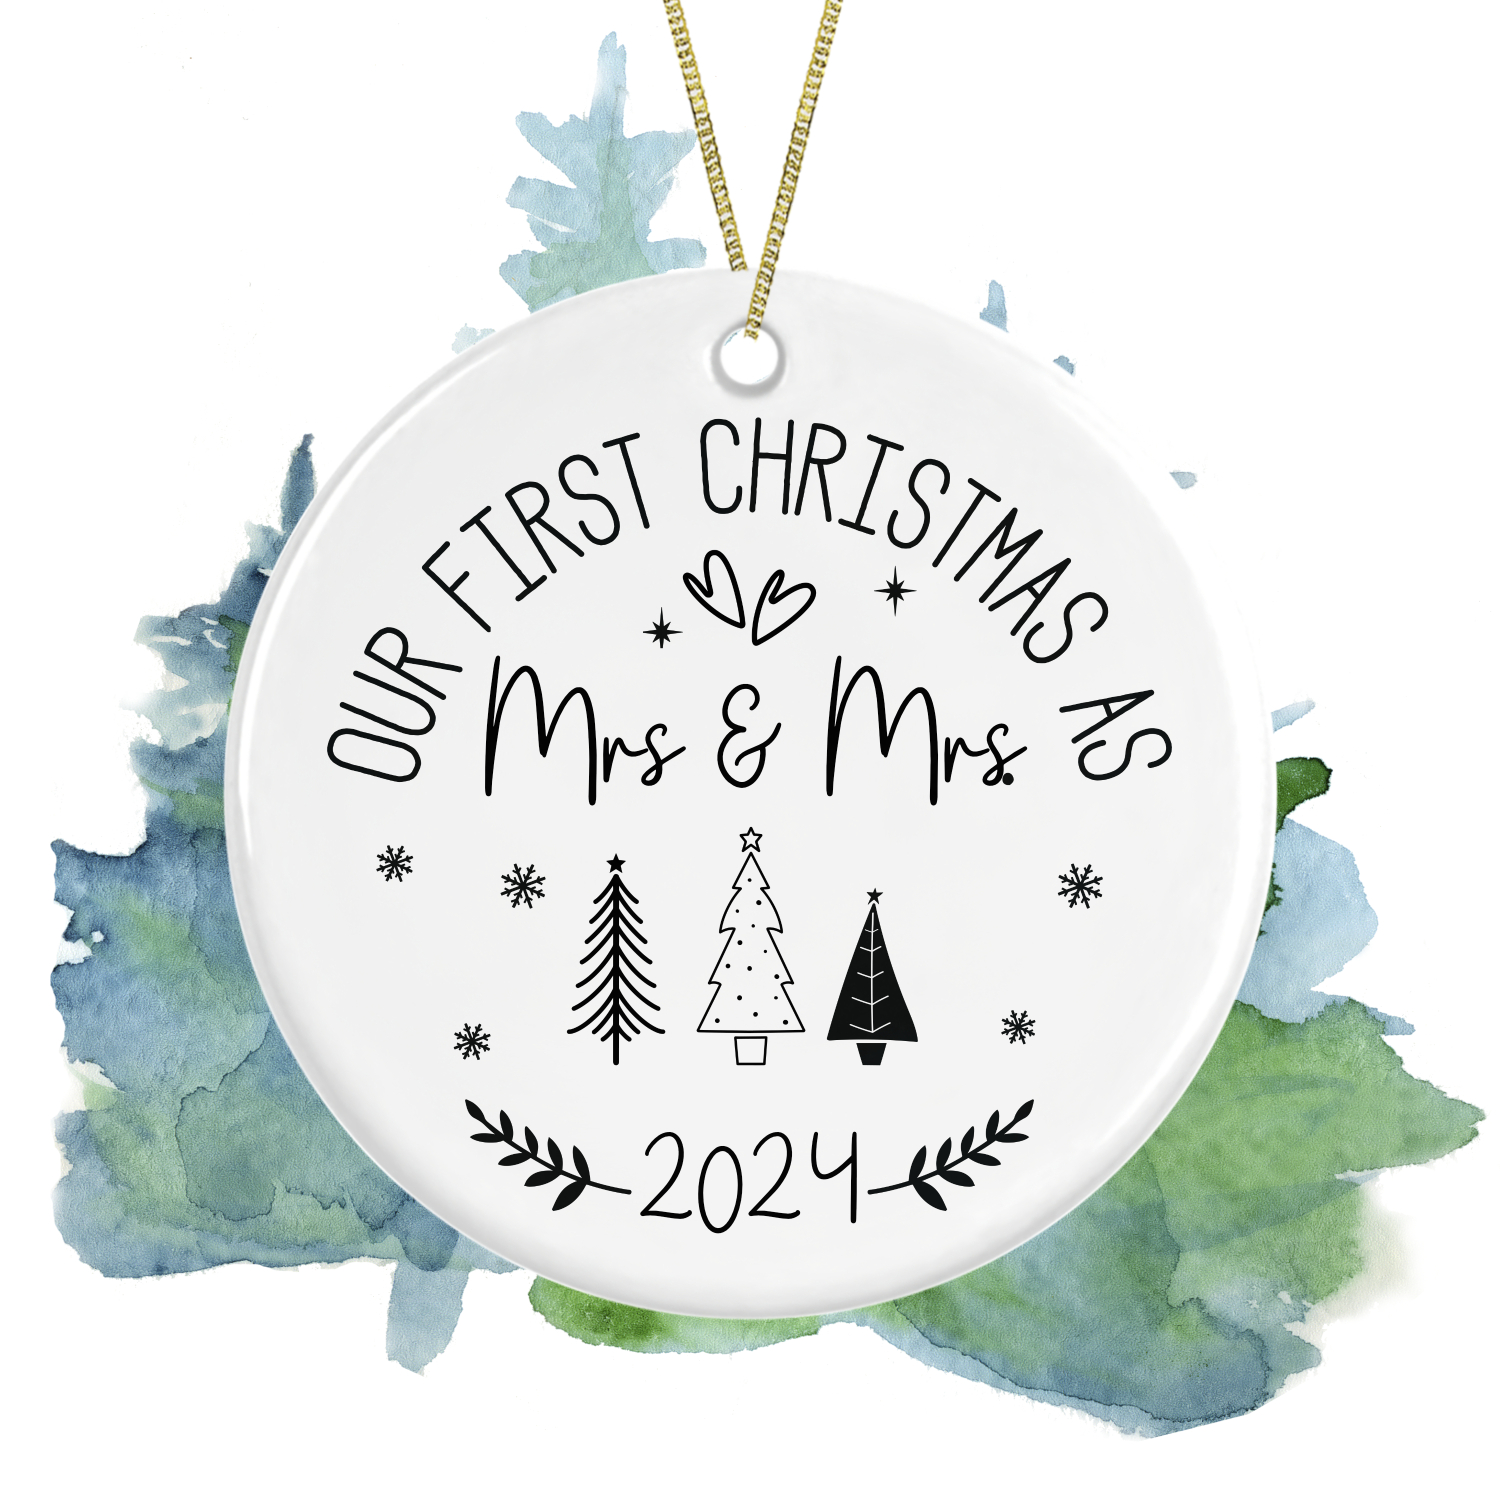 Personalised Ceramic Christmas Tree Decoration - Our First Christmas as Mrs & Mrs